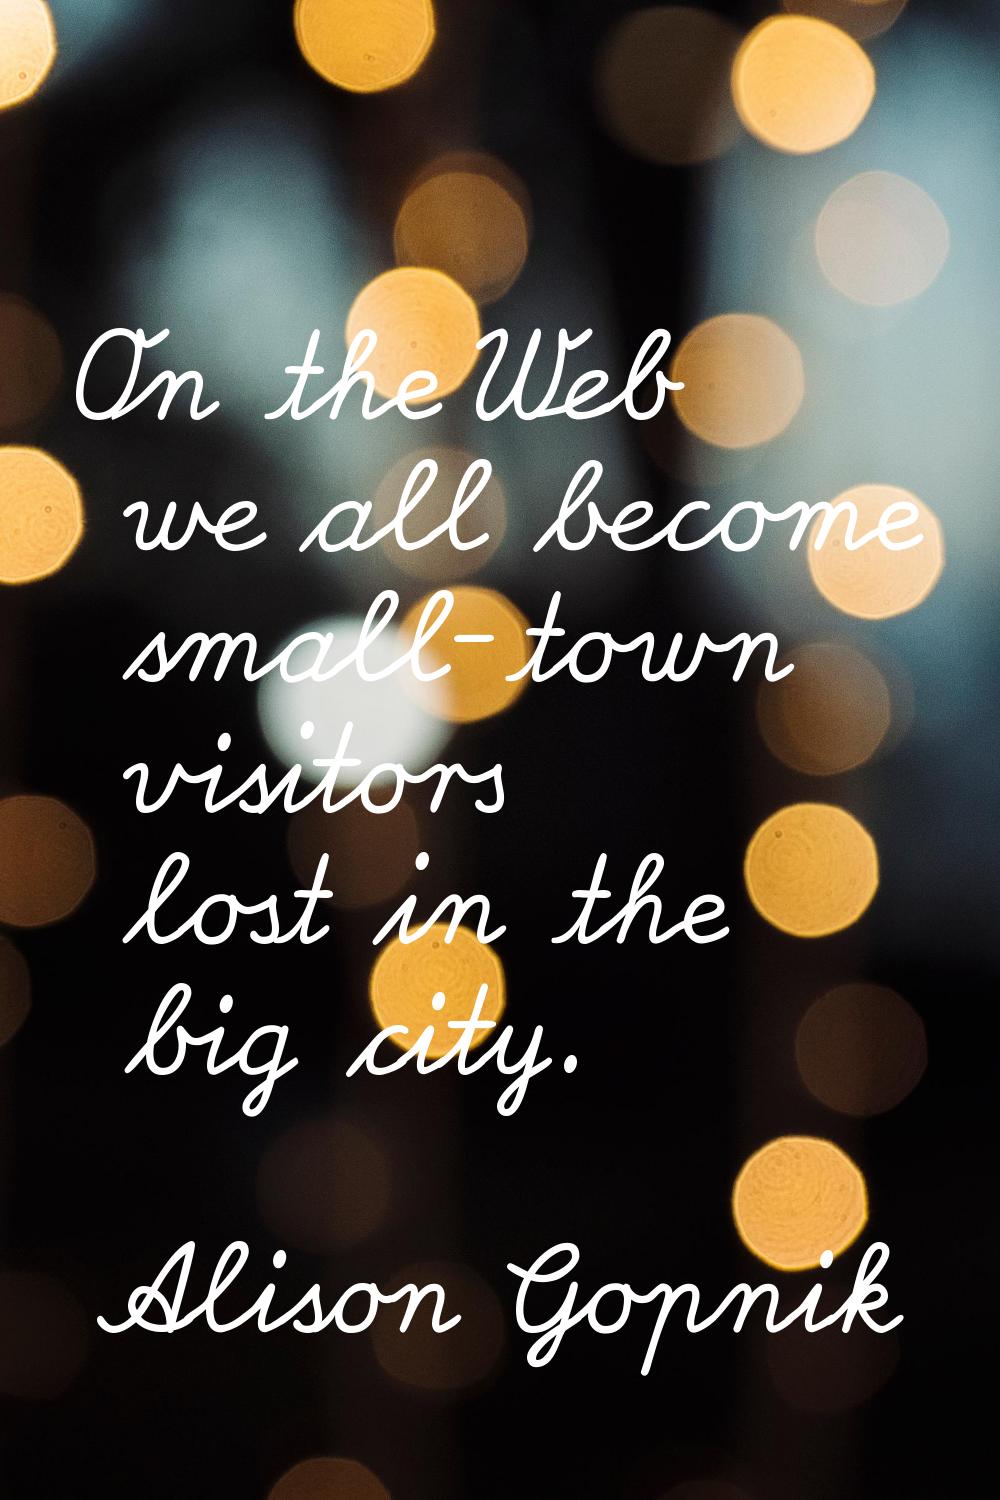 On the Web we all become small-town visitors lost in the big city.